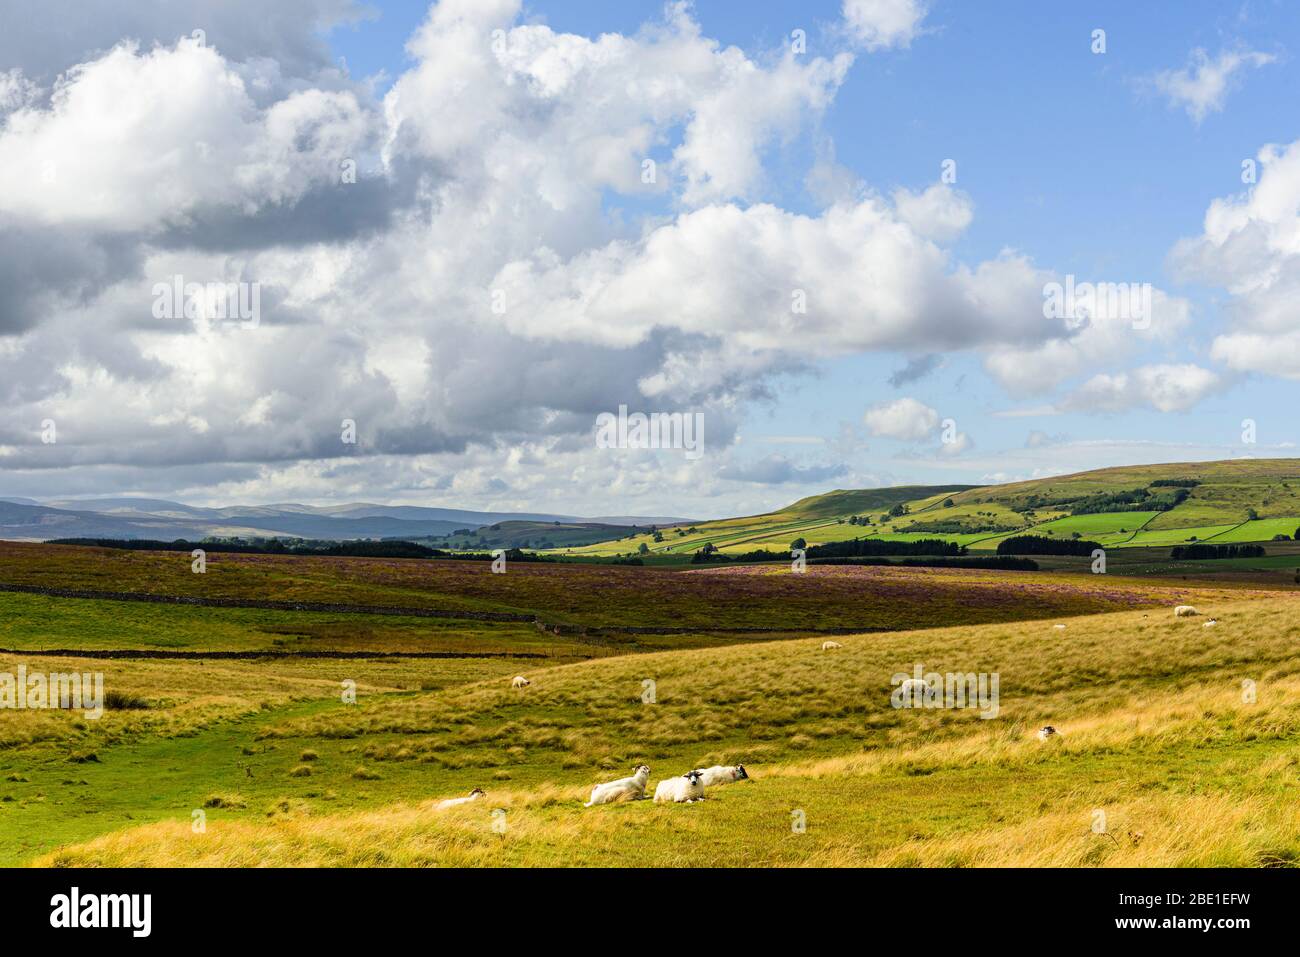 Sheep on Ravenstonedale Moor in the Cumbrian part of theYorkshire Dales National Park with the Lakeland fells in the distance Stock Photo